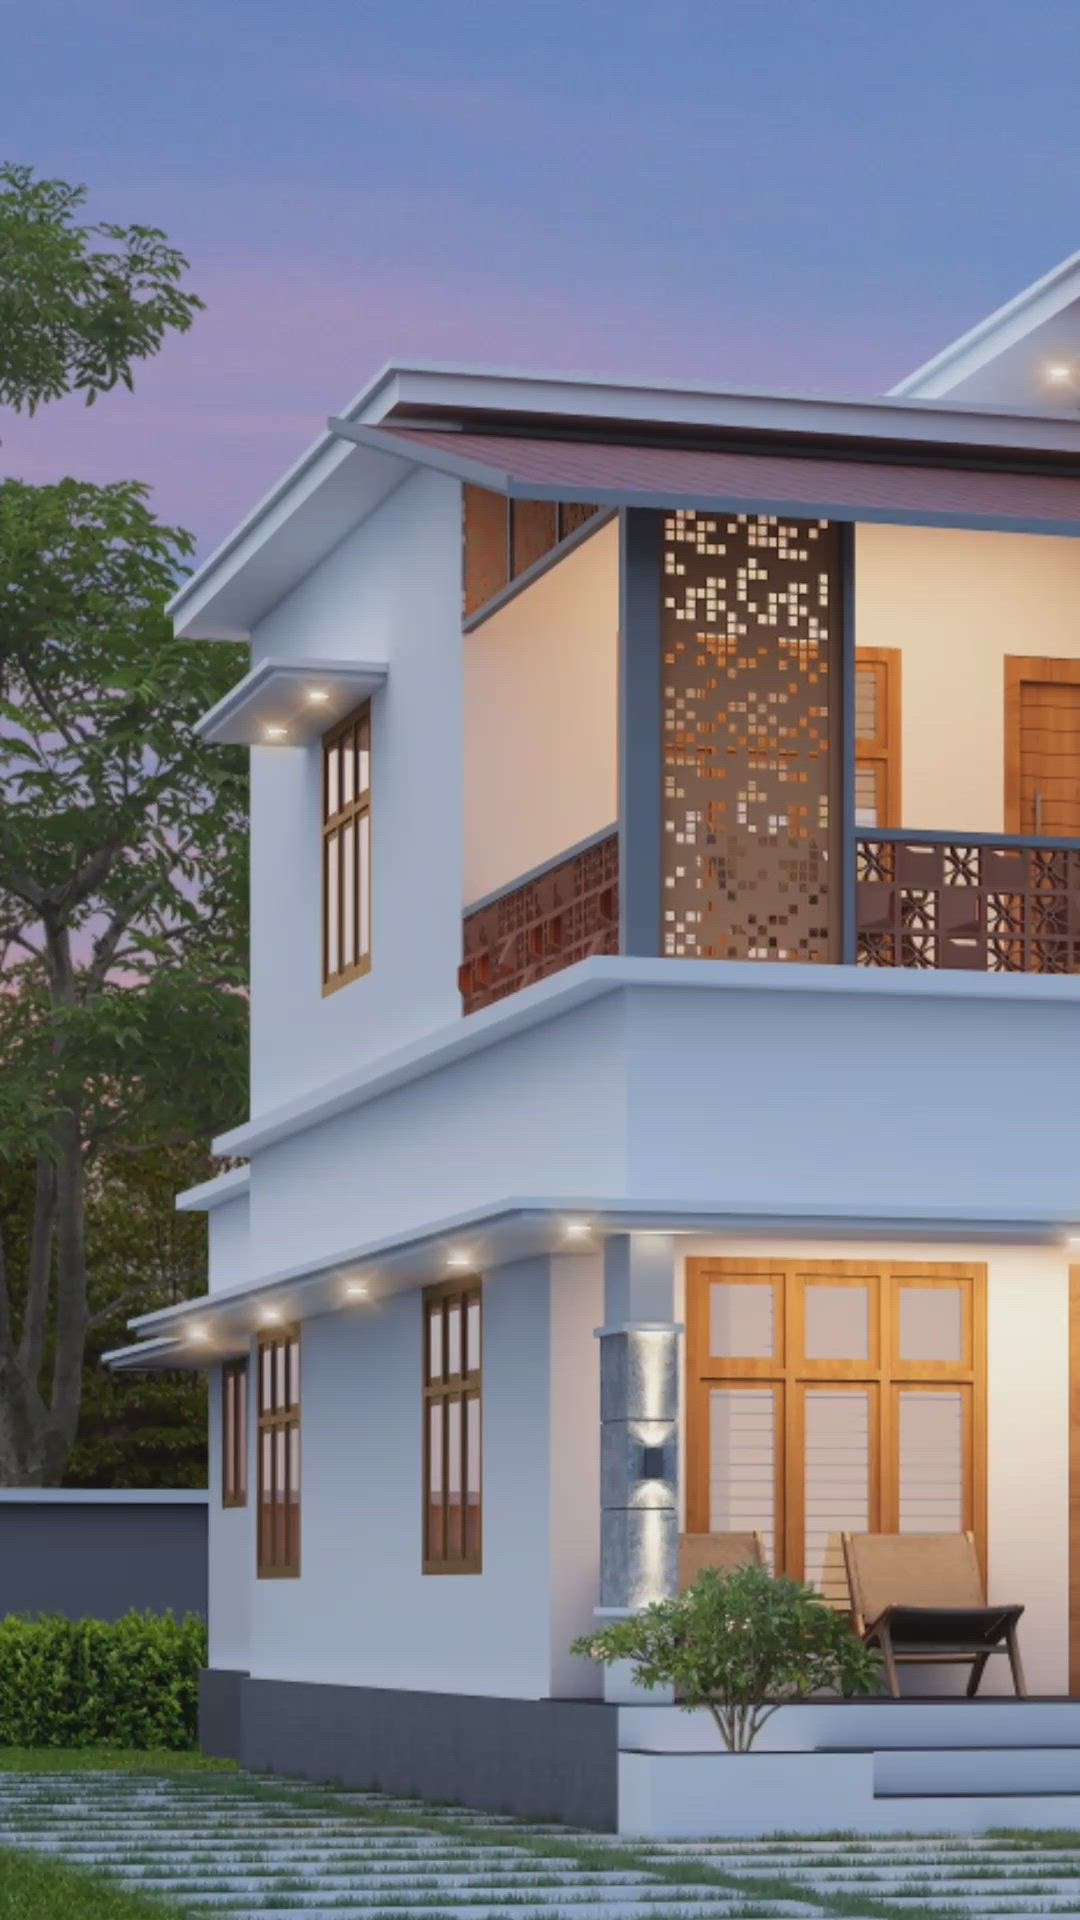 Proposed design for upcoming project Kuttur,Thrissur dist

For enquiries contact: 8943303889,8129773889

 #ElevationHome  #homesweethome  #ContemporaryHouse  #MrHomeKerala #Designs #trendig #new_home #Designs #homedesigning #homesweethome #Architectural&Interior #greenart #happyhome #buildersthrissur #homedesign